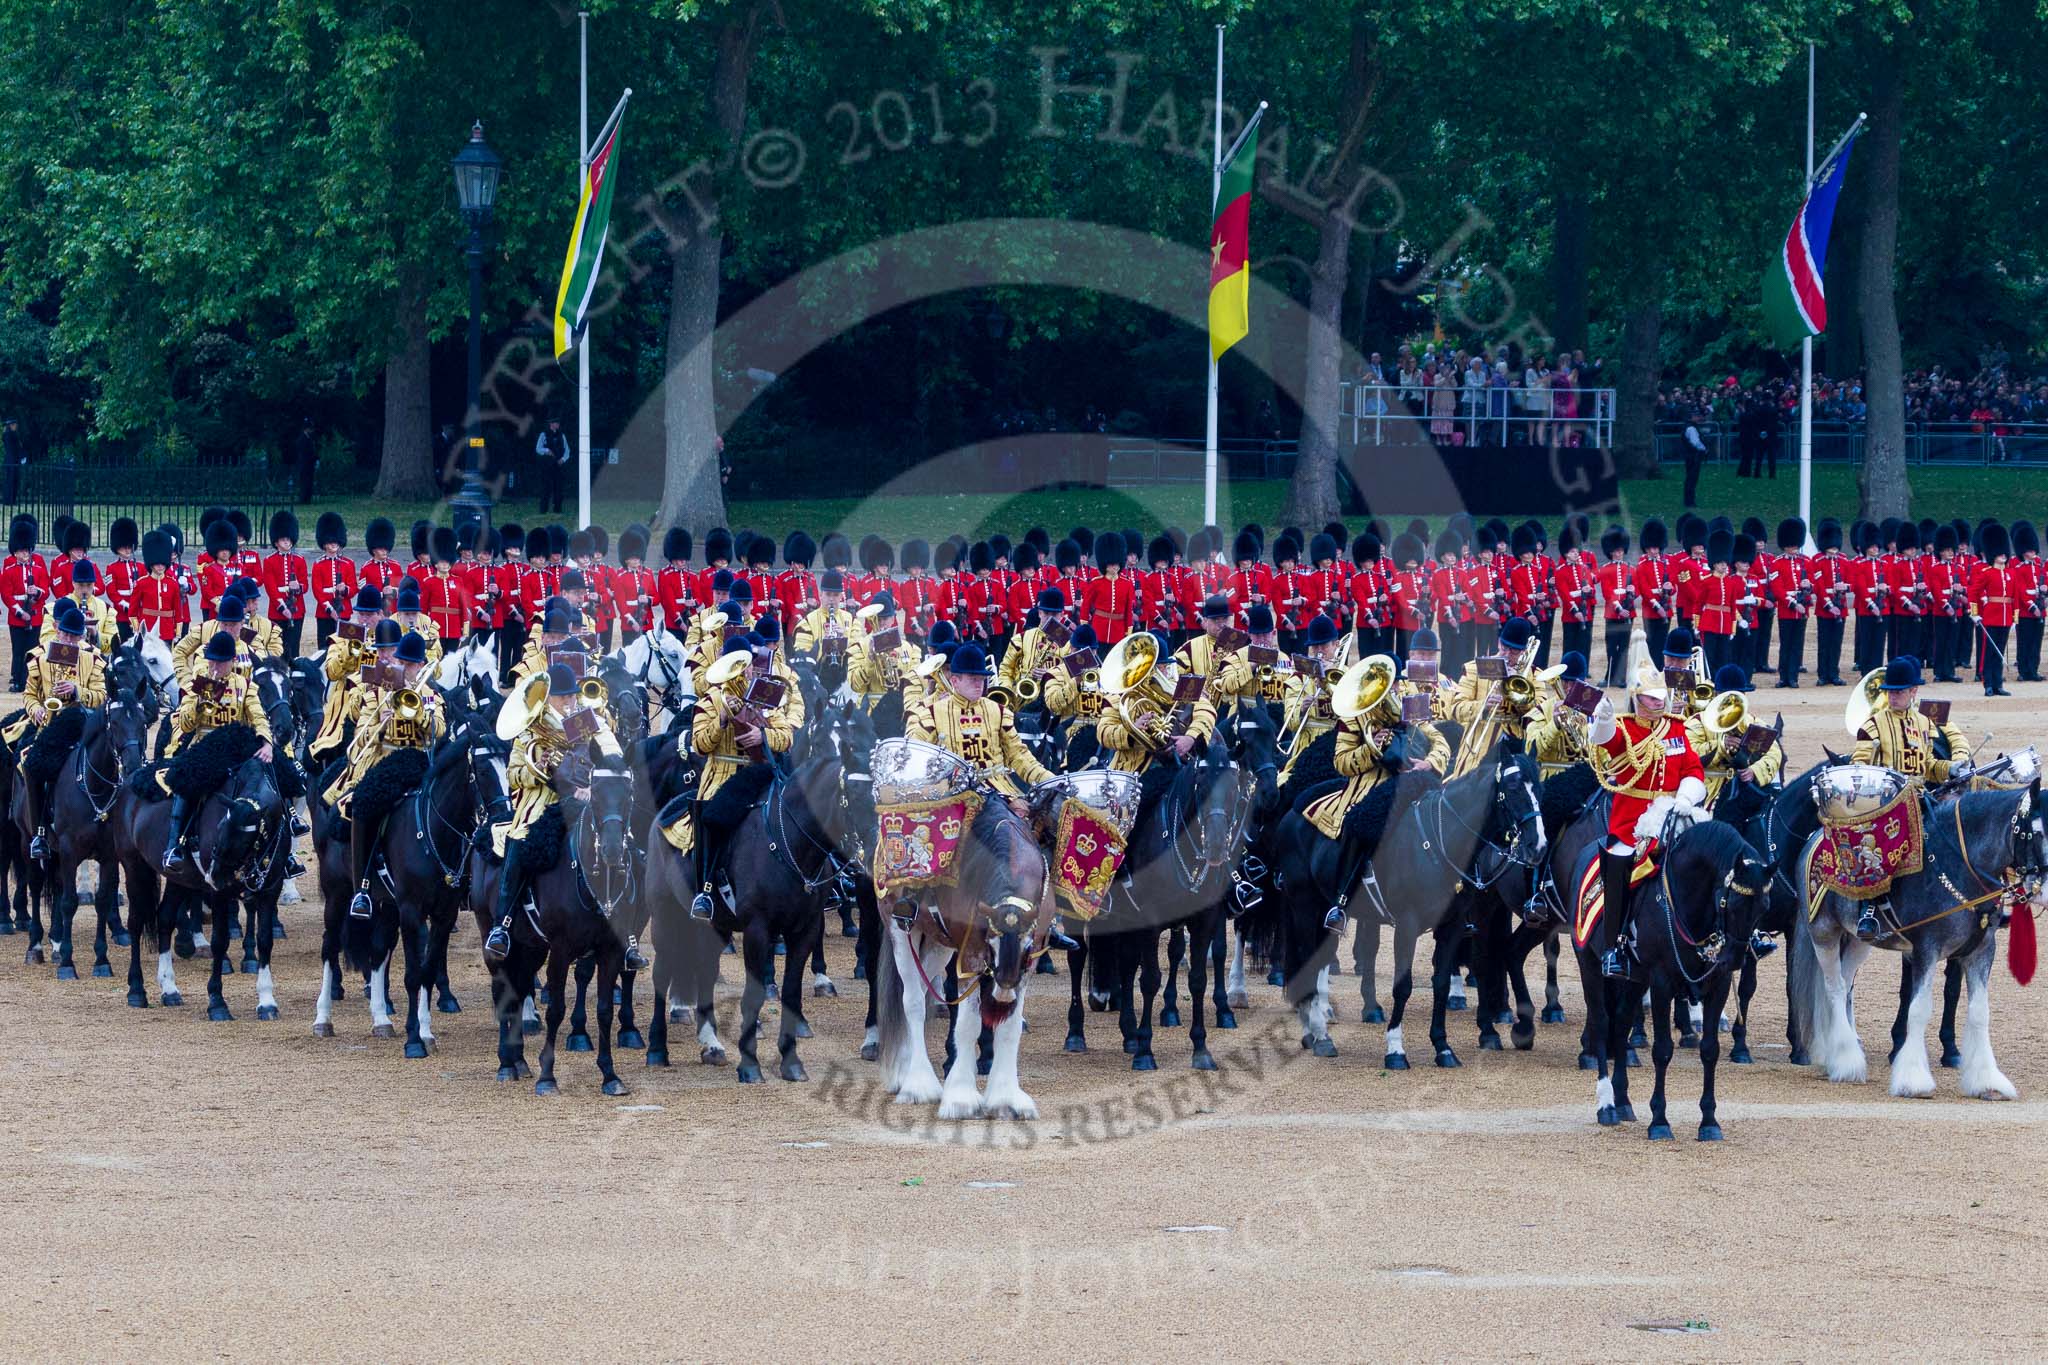 Trooping the Colour 2015. Image #613, 13 June 2015 11:58 Horse Guards Parade, London, UK